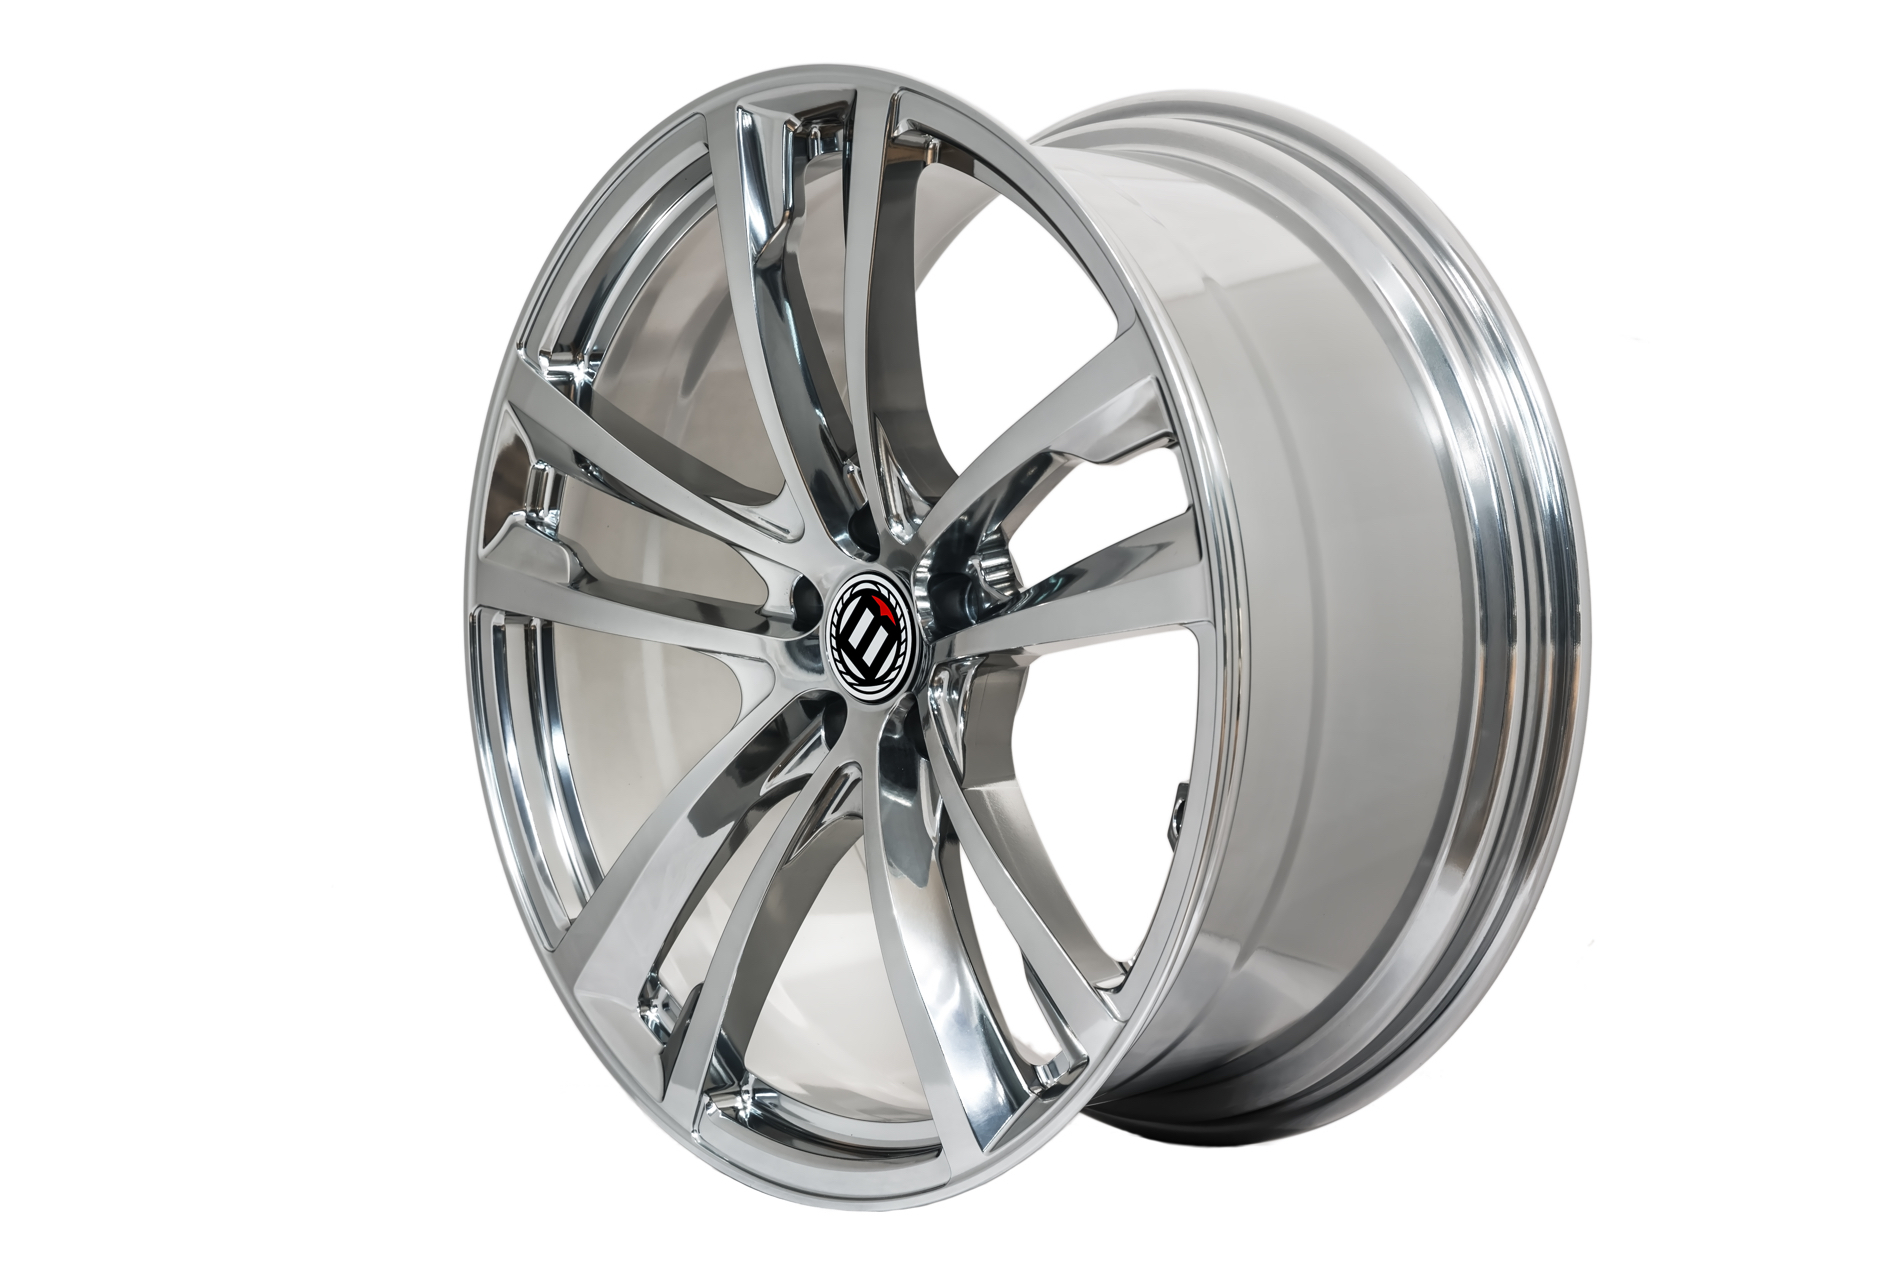 Beneventi Ace forged wheels